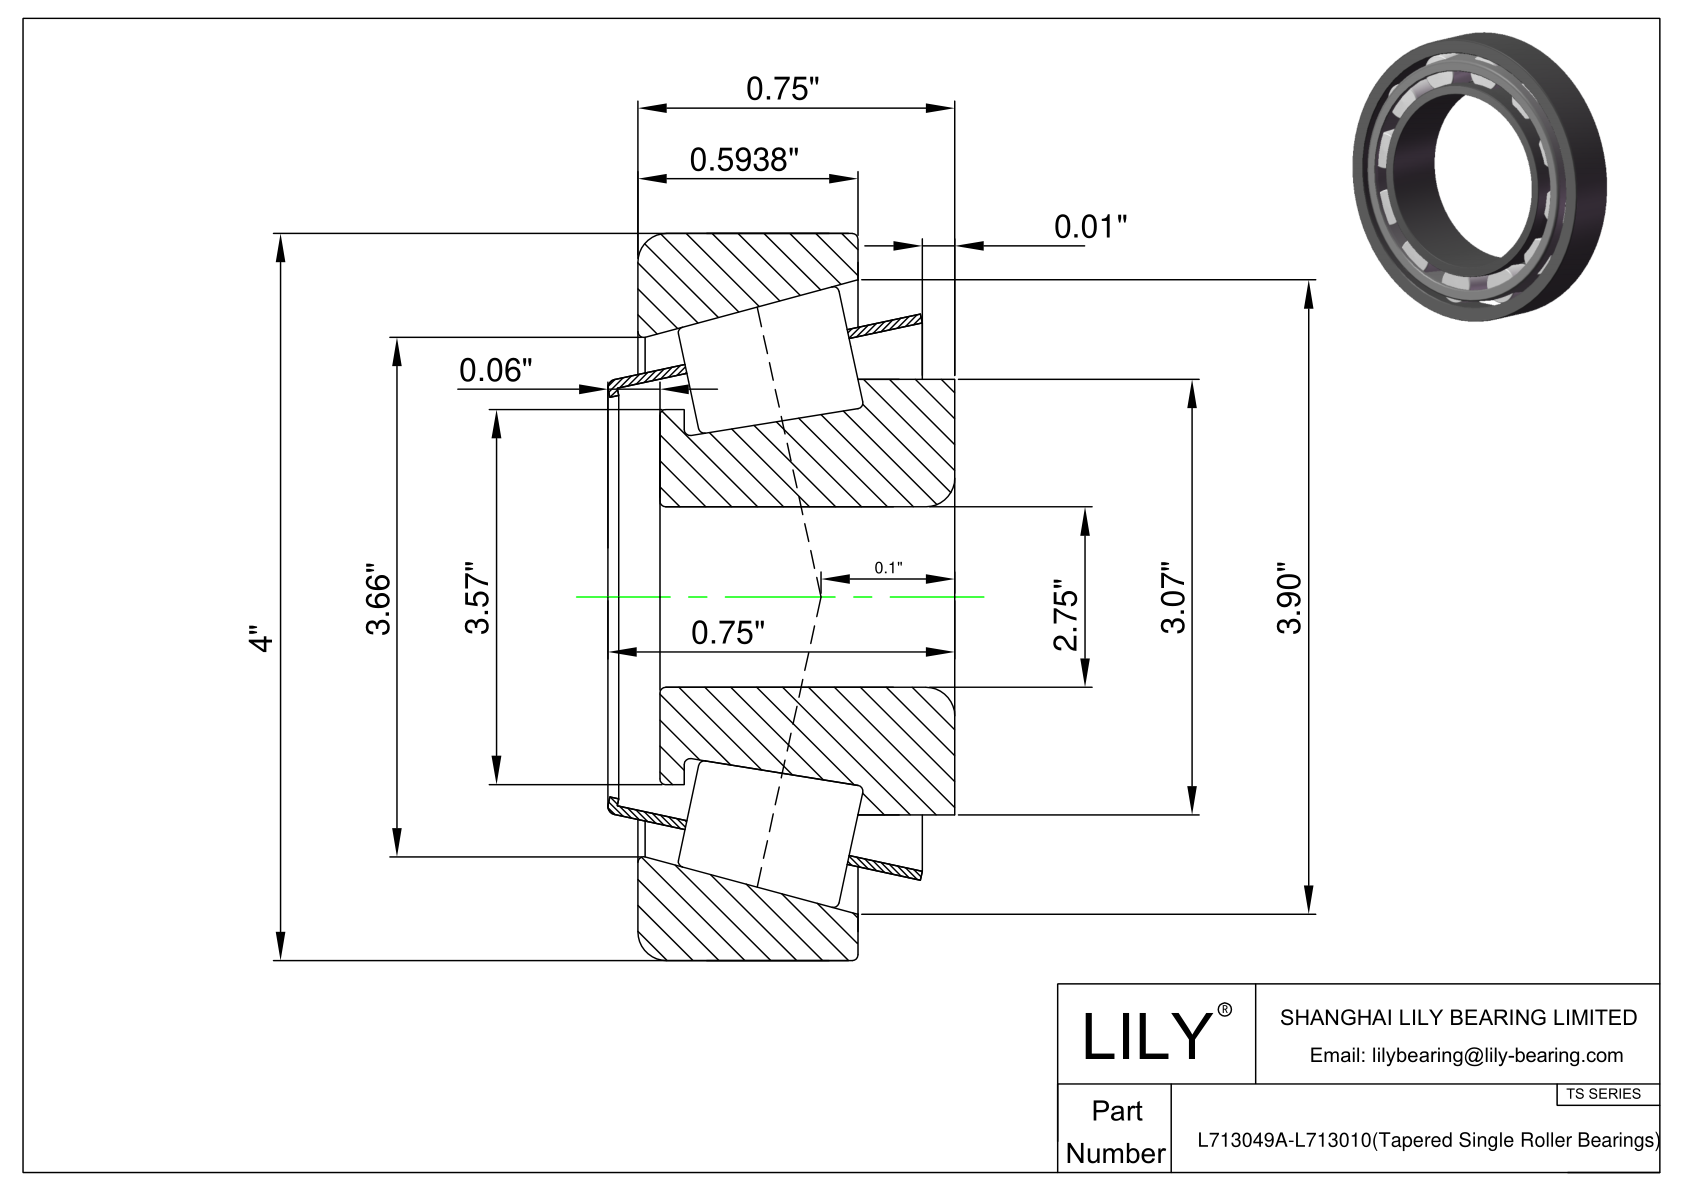 L713049A-L713010 TS (Tapered Single Roller Bearings) (Imperial) cad drawing